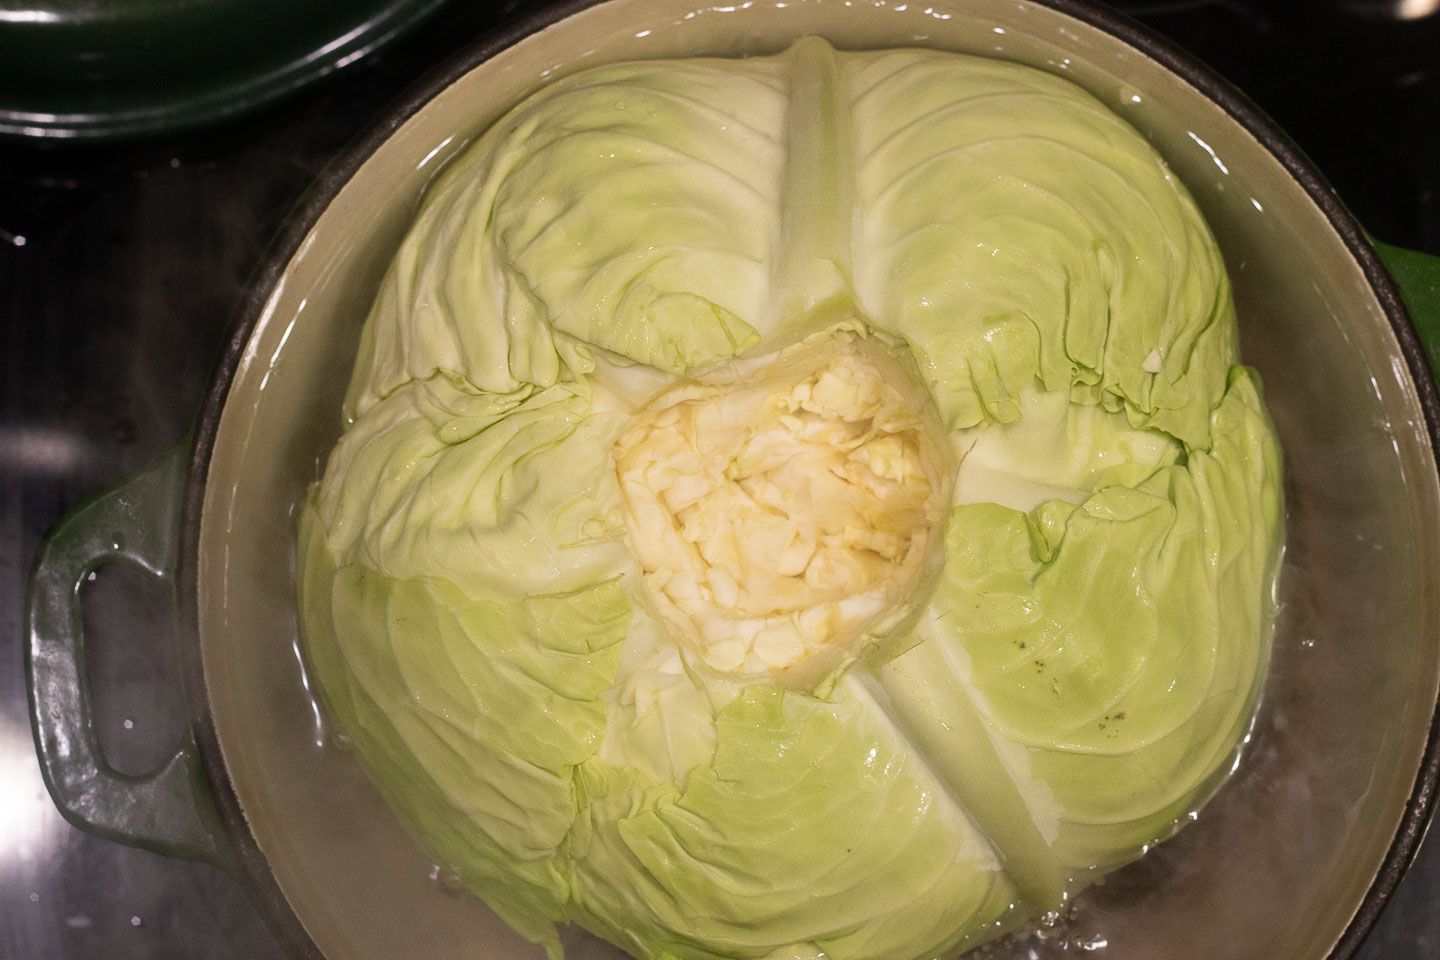 How to Prepare Cabbage for Cabbage Rolls